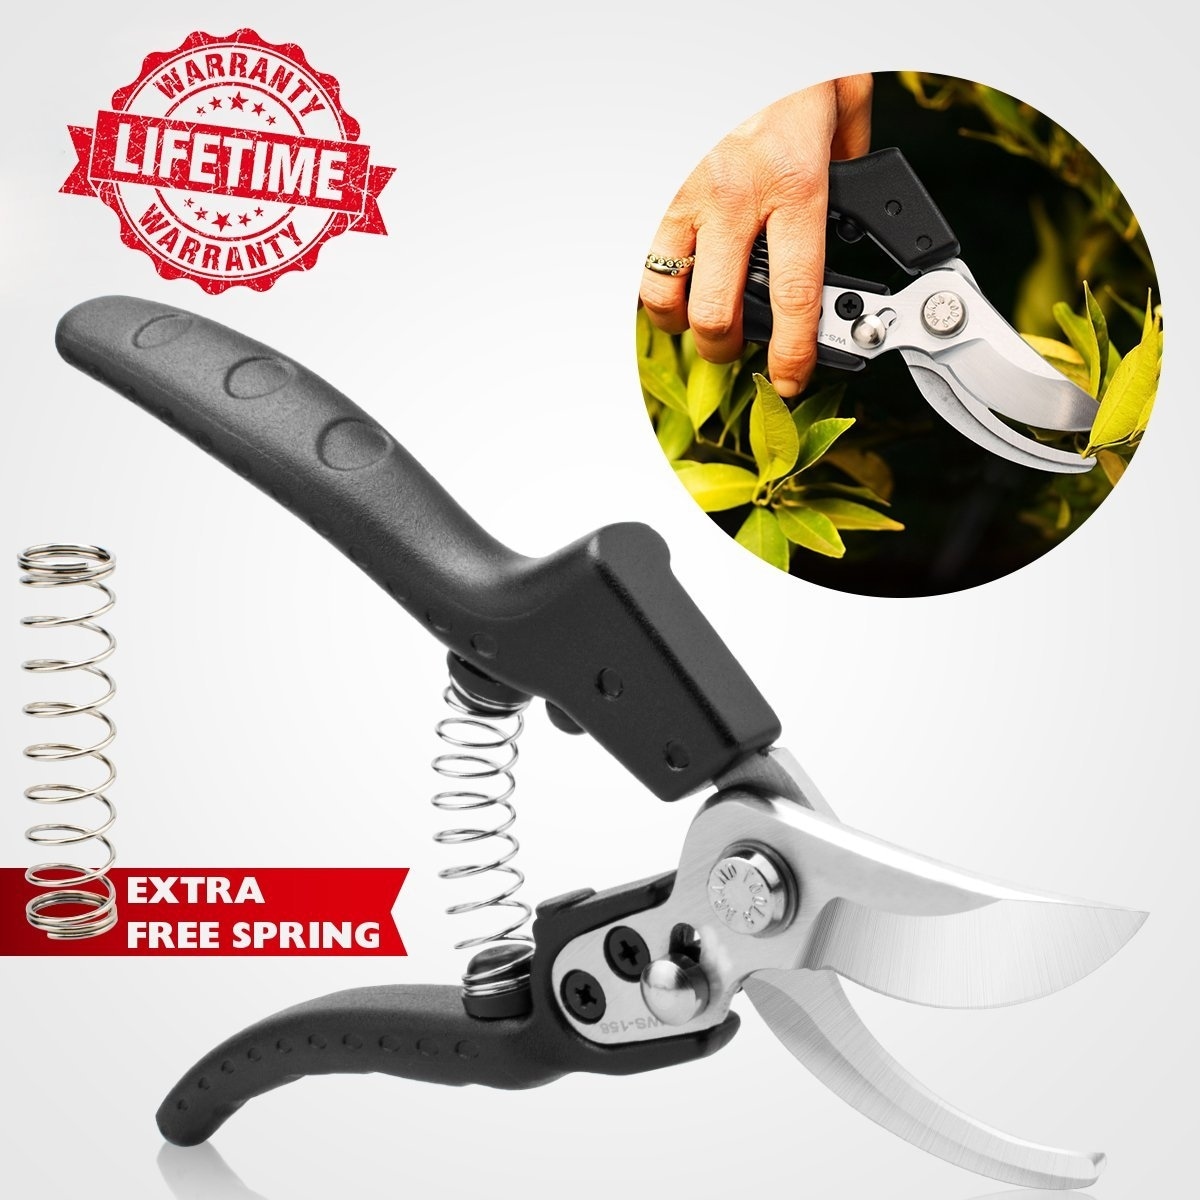 Green Garden Shears with Spring and Safety Buckle Garden Clippers for Garden Harvesting Fruits & Vegetables T-MAI SK-5 Bypass Hand Pruners Tree Trimmers Secateurs Pruning Shears 